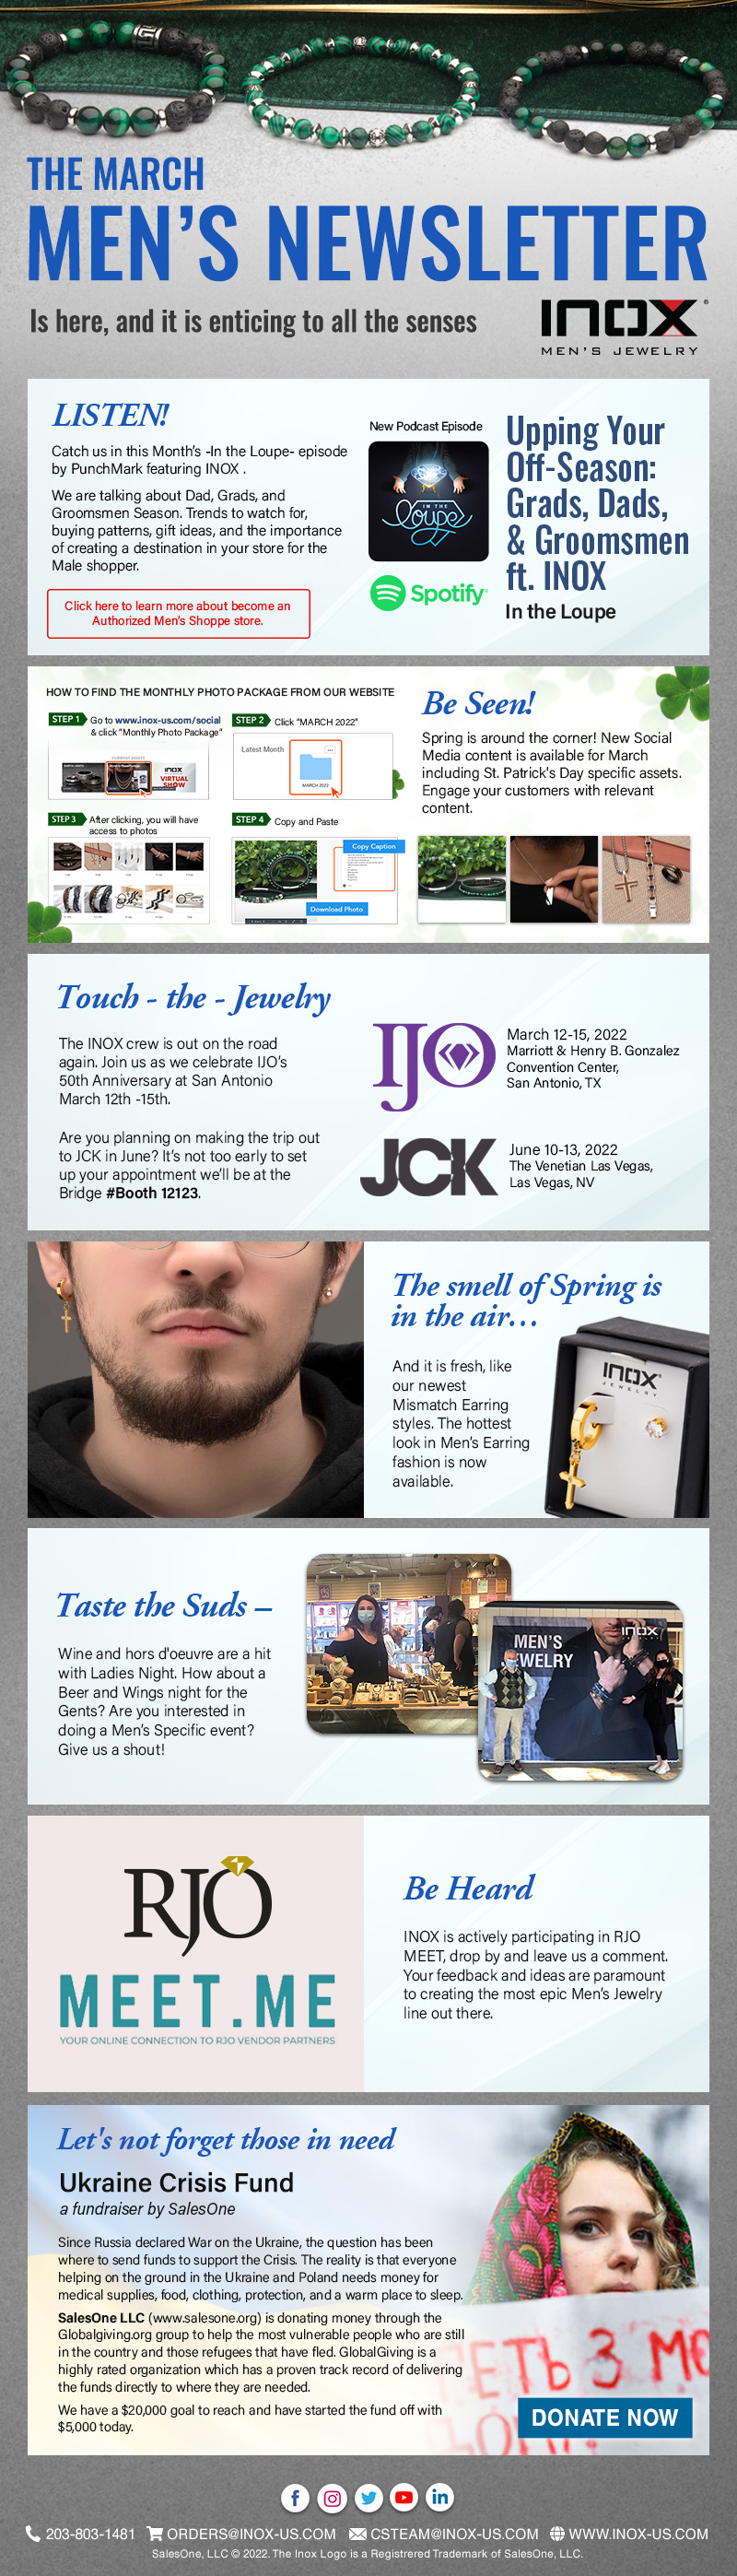 The March Men's Newsletter by INOX